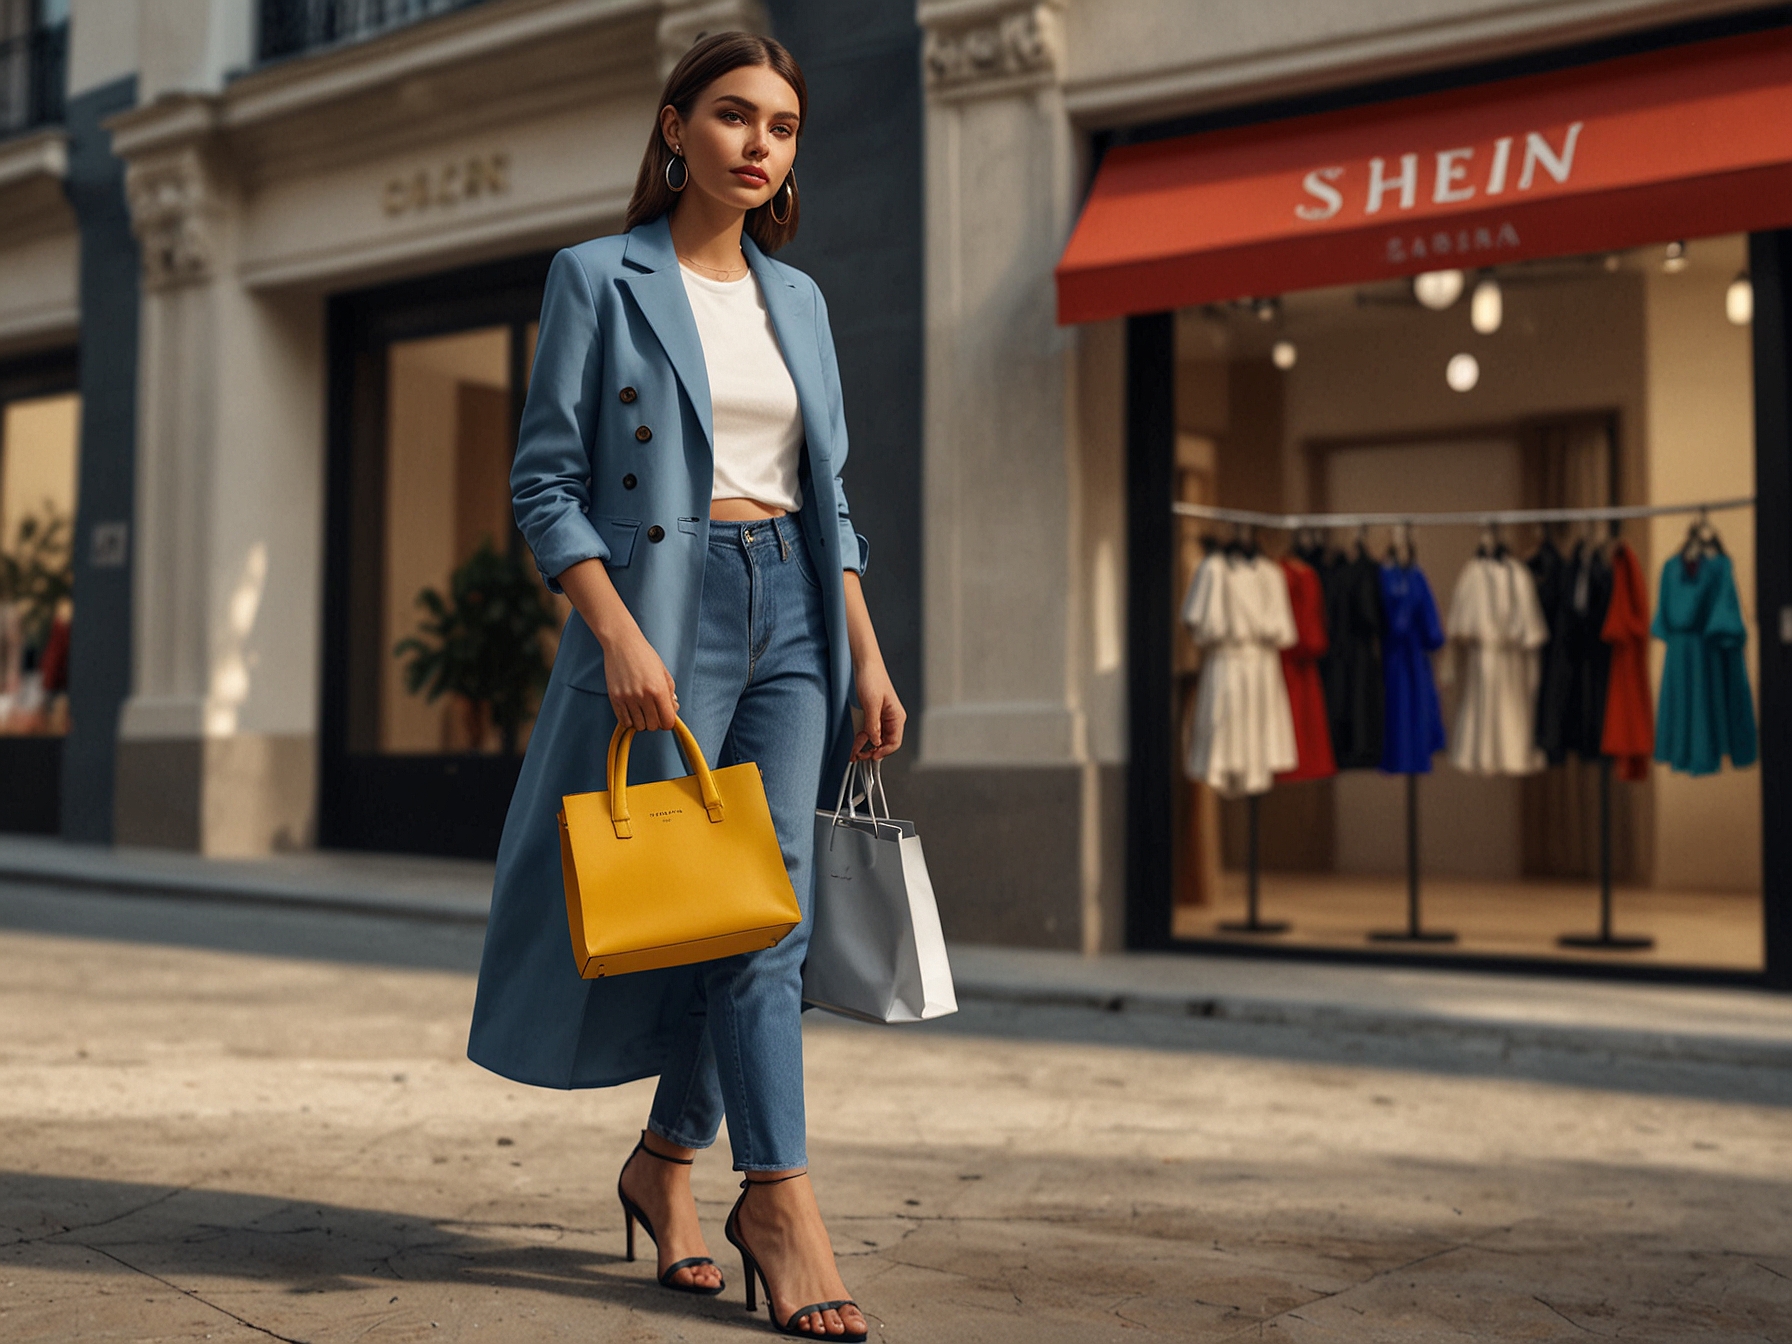 A stylish shopper using the search term 'Exactly the same' on SHEIN's platform, highlighting a collection of affordable clothing items that resemble trendy Zara designs.